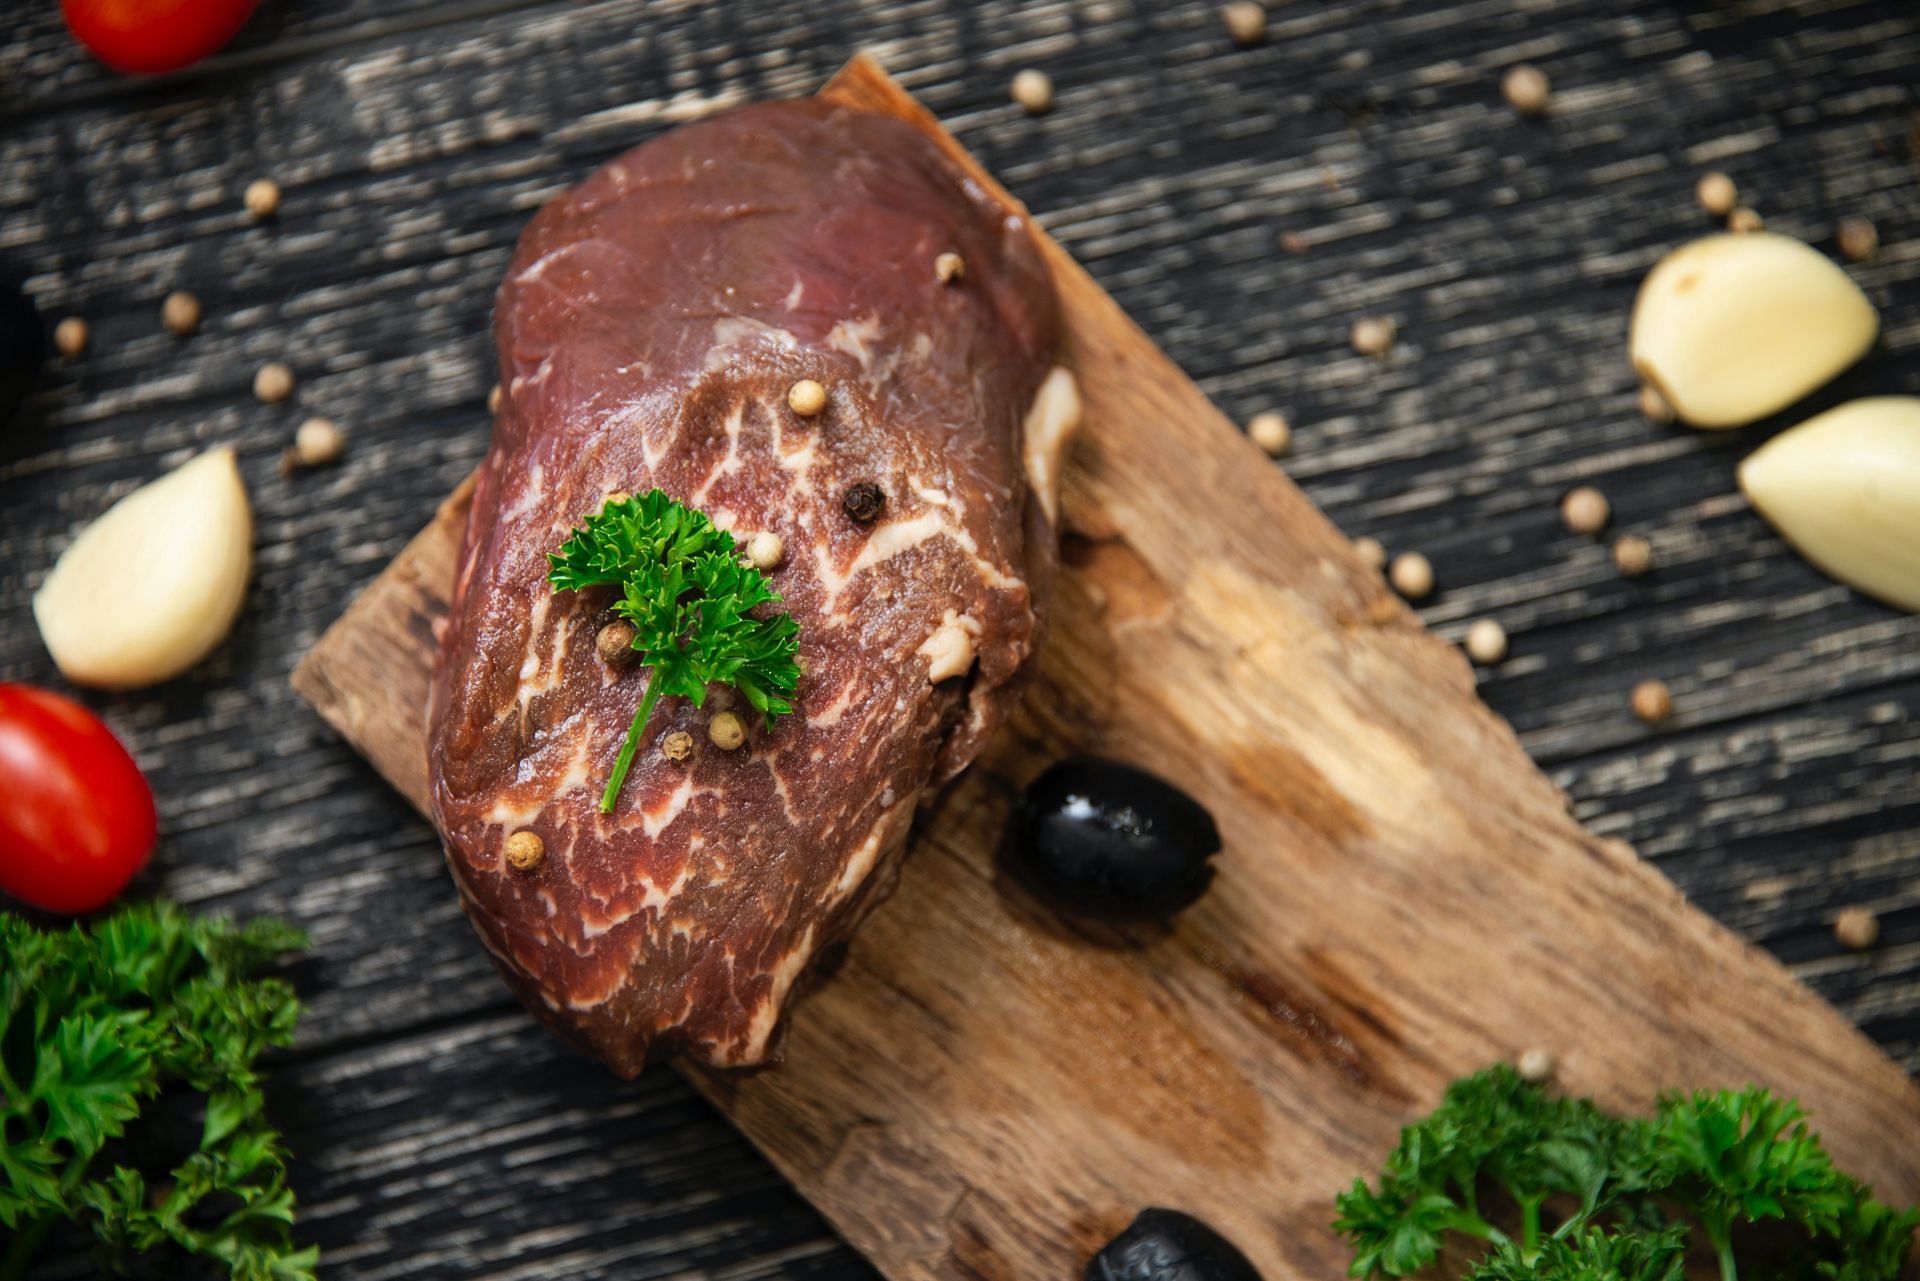 Importance of meat (image sourced via Pexels / Photo by kristya)